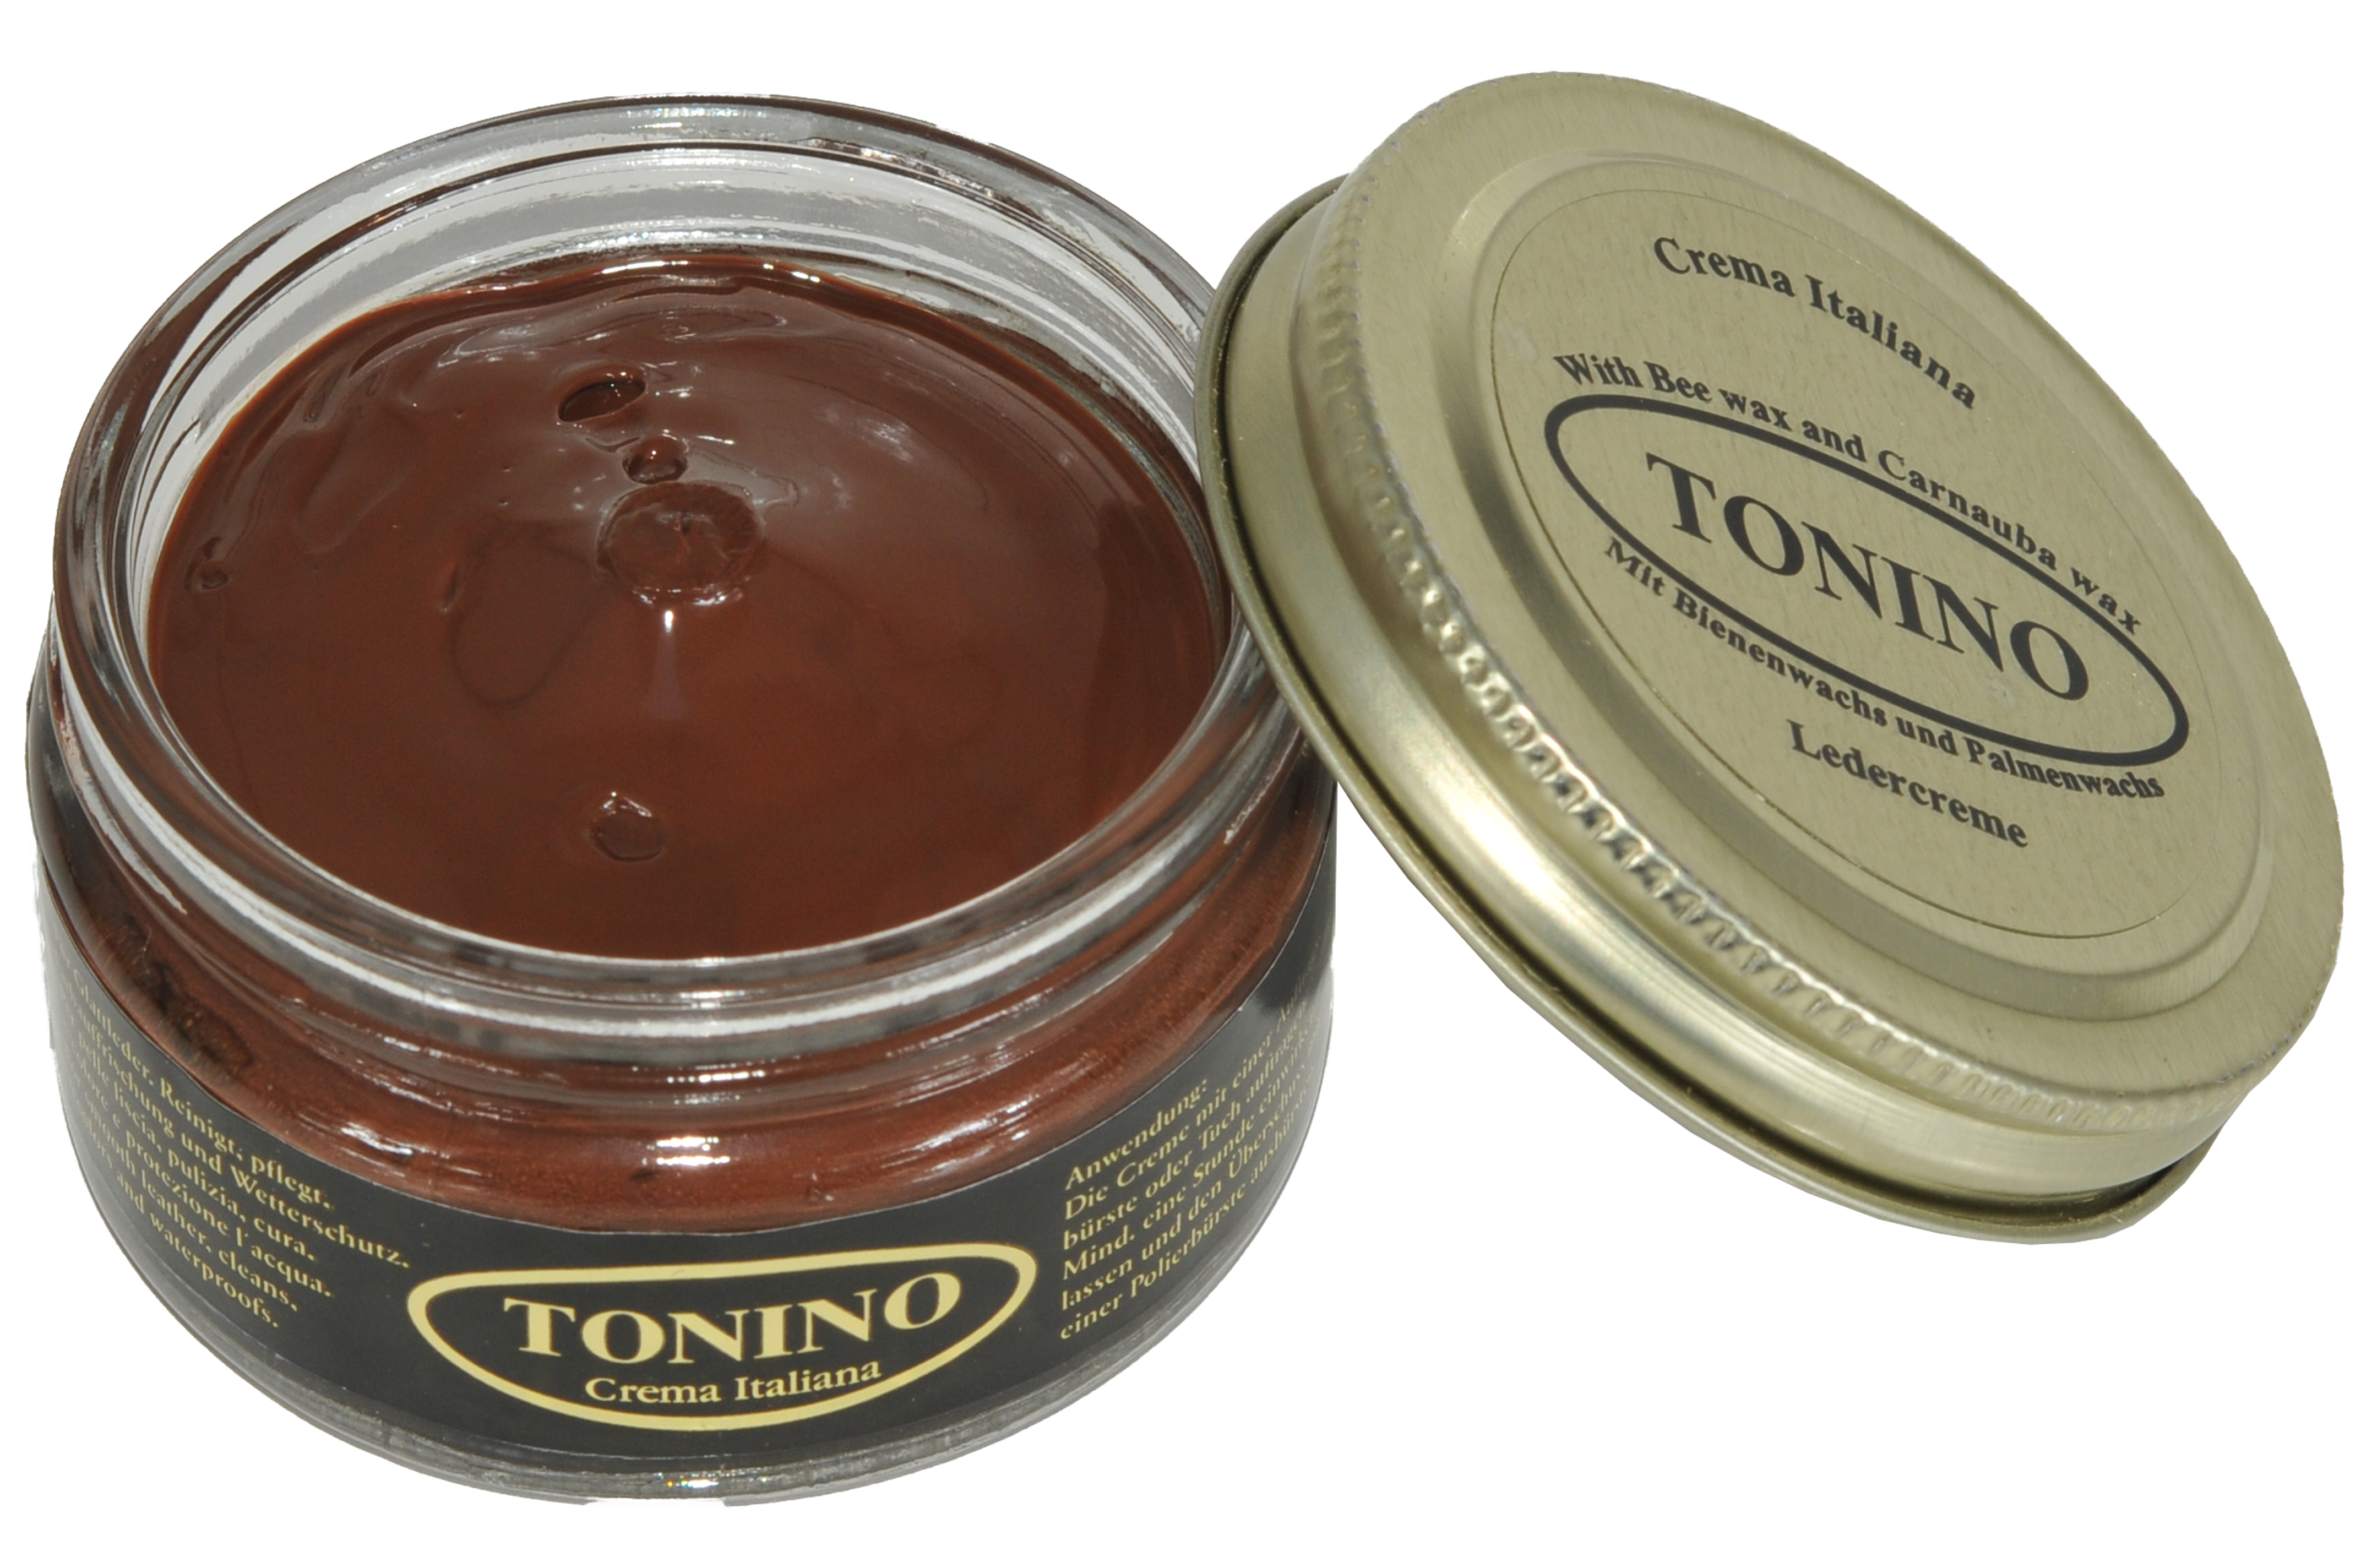 Medium brown Tonino leather cream in the glass. Care + protection.